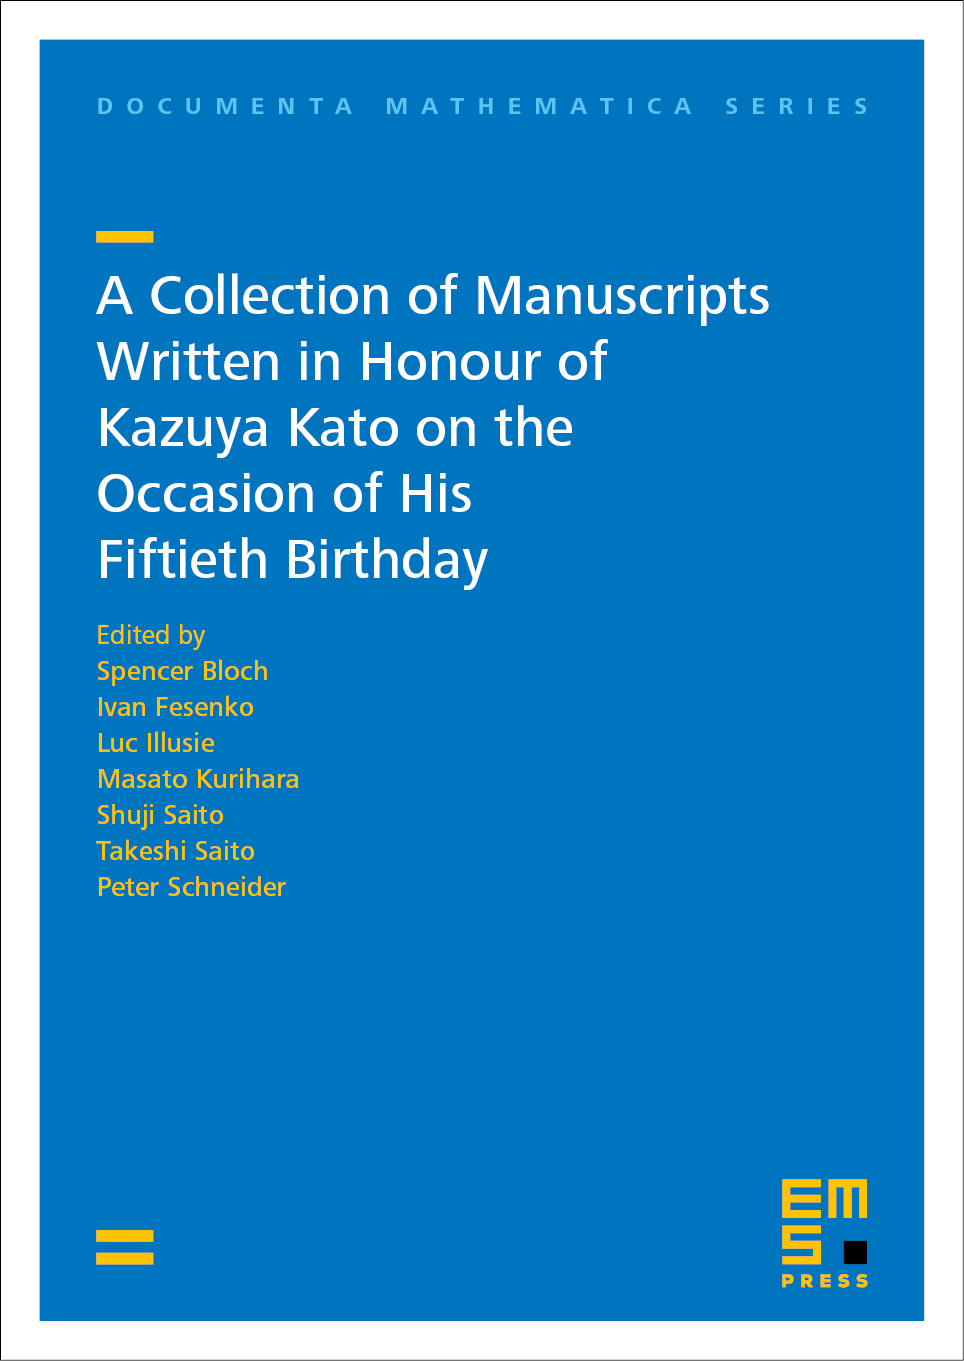 A Collection of Manuscripts Written in Honour of Kazuya Kato on the Occasion of His Fiftieth Birthday cover